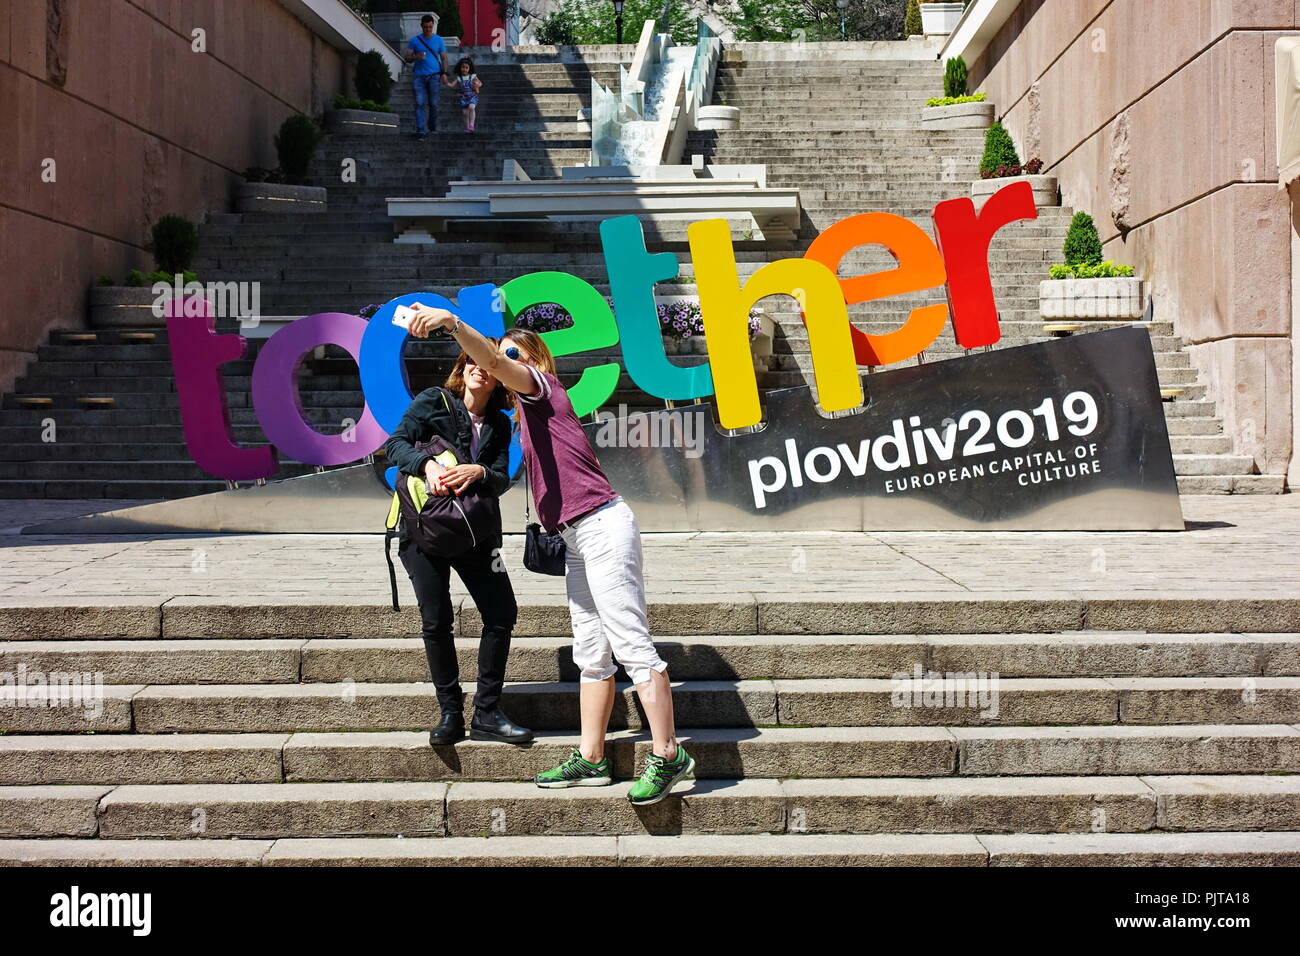 PLOVDIV, BULGARIA - May 2018 - Center of Plovdiv, Bulgaria. Plovdiv will be the European Capital of Culture in 2019. Stock Photo